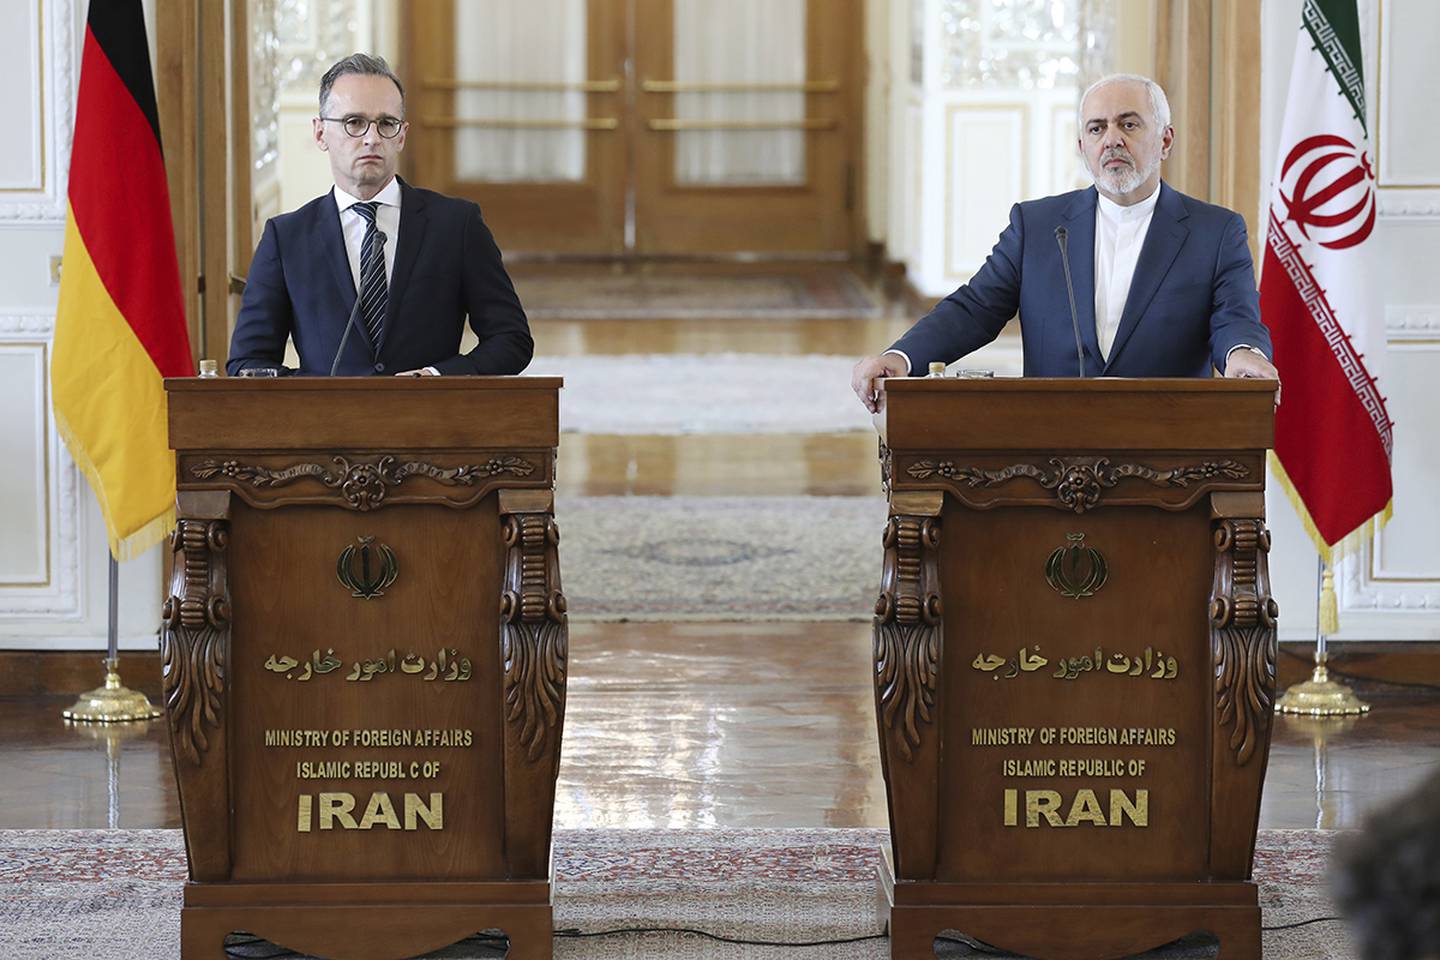 Iranian Foreign Minister Mohammad Javad Zarif, right, and his German counterpart Heiko Maas give a press conference after their talks